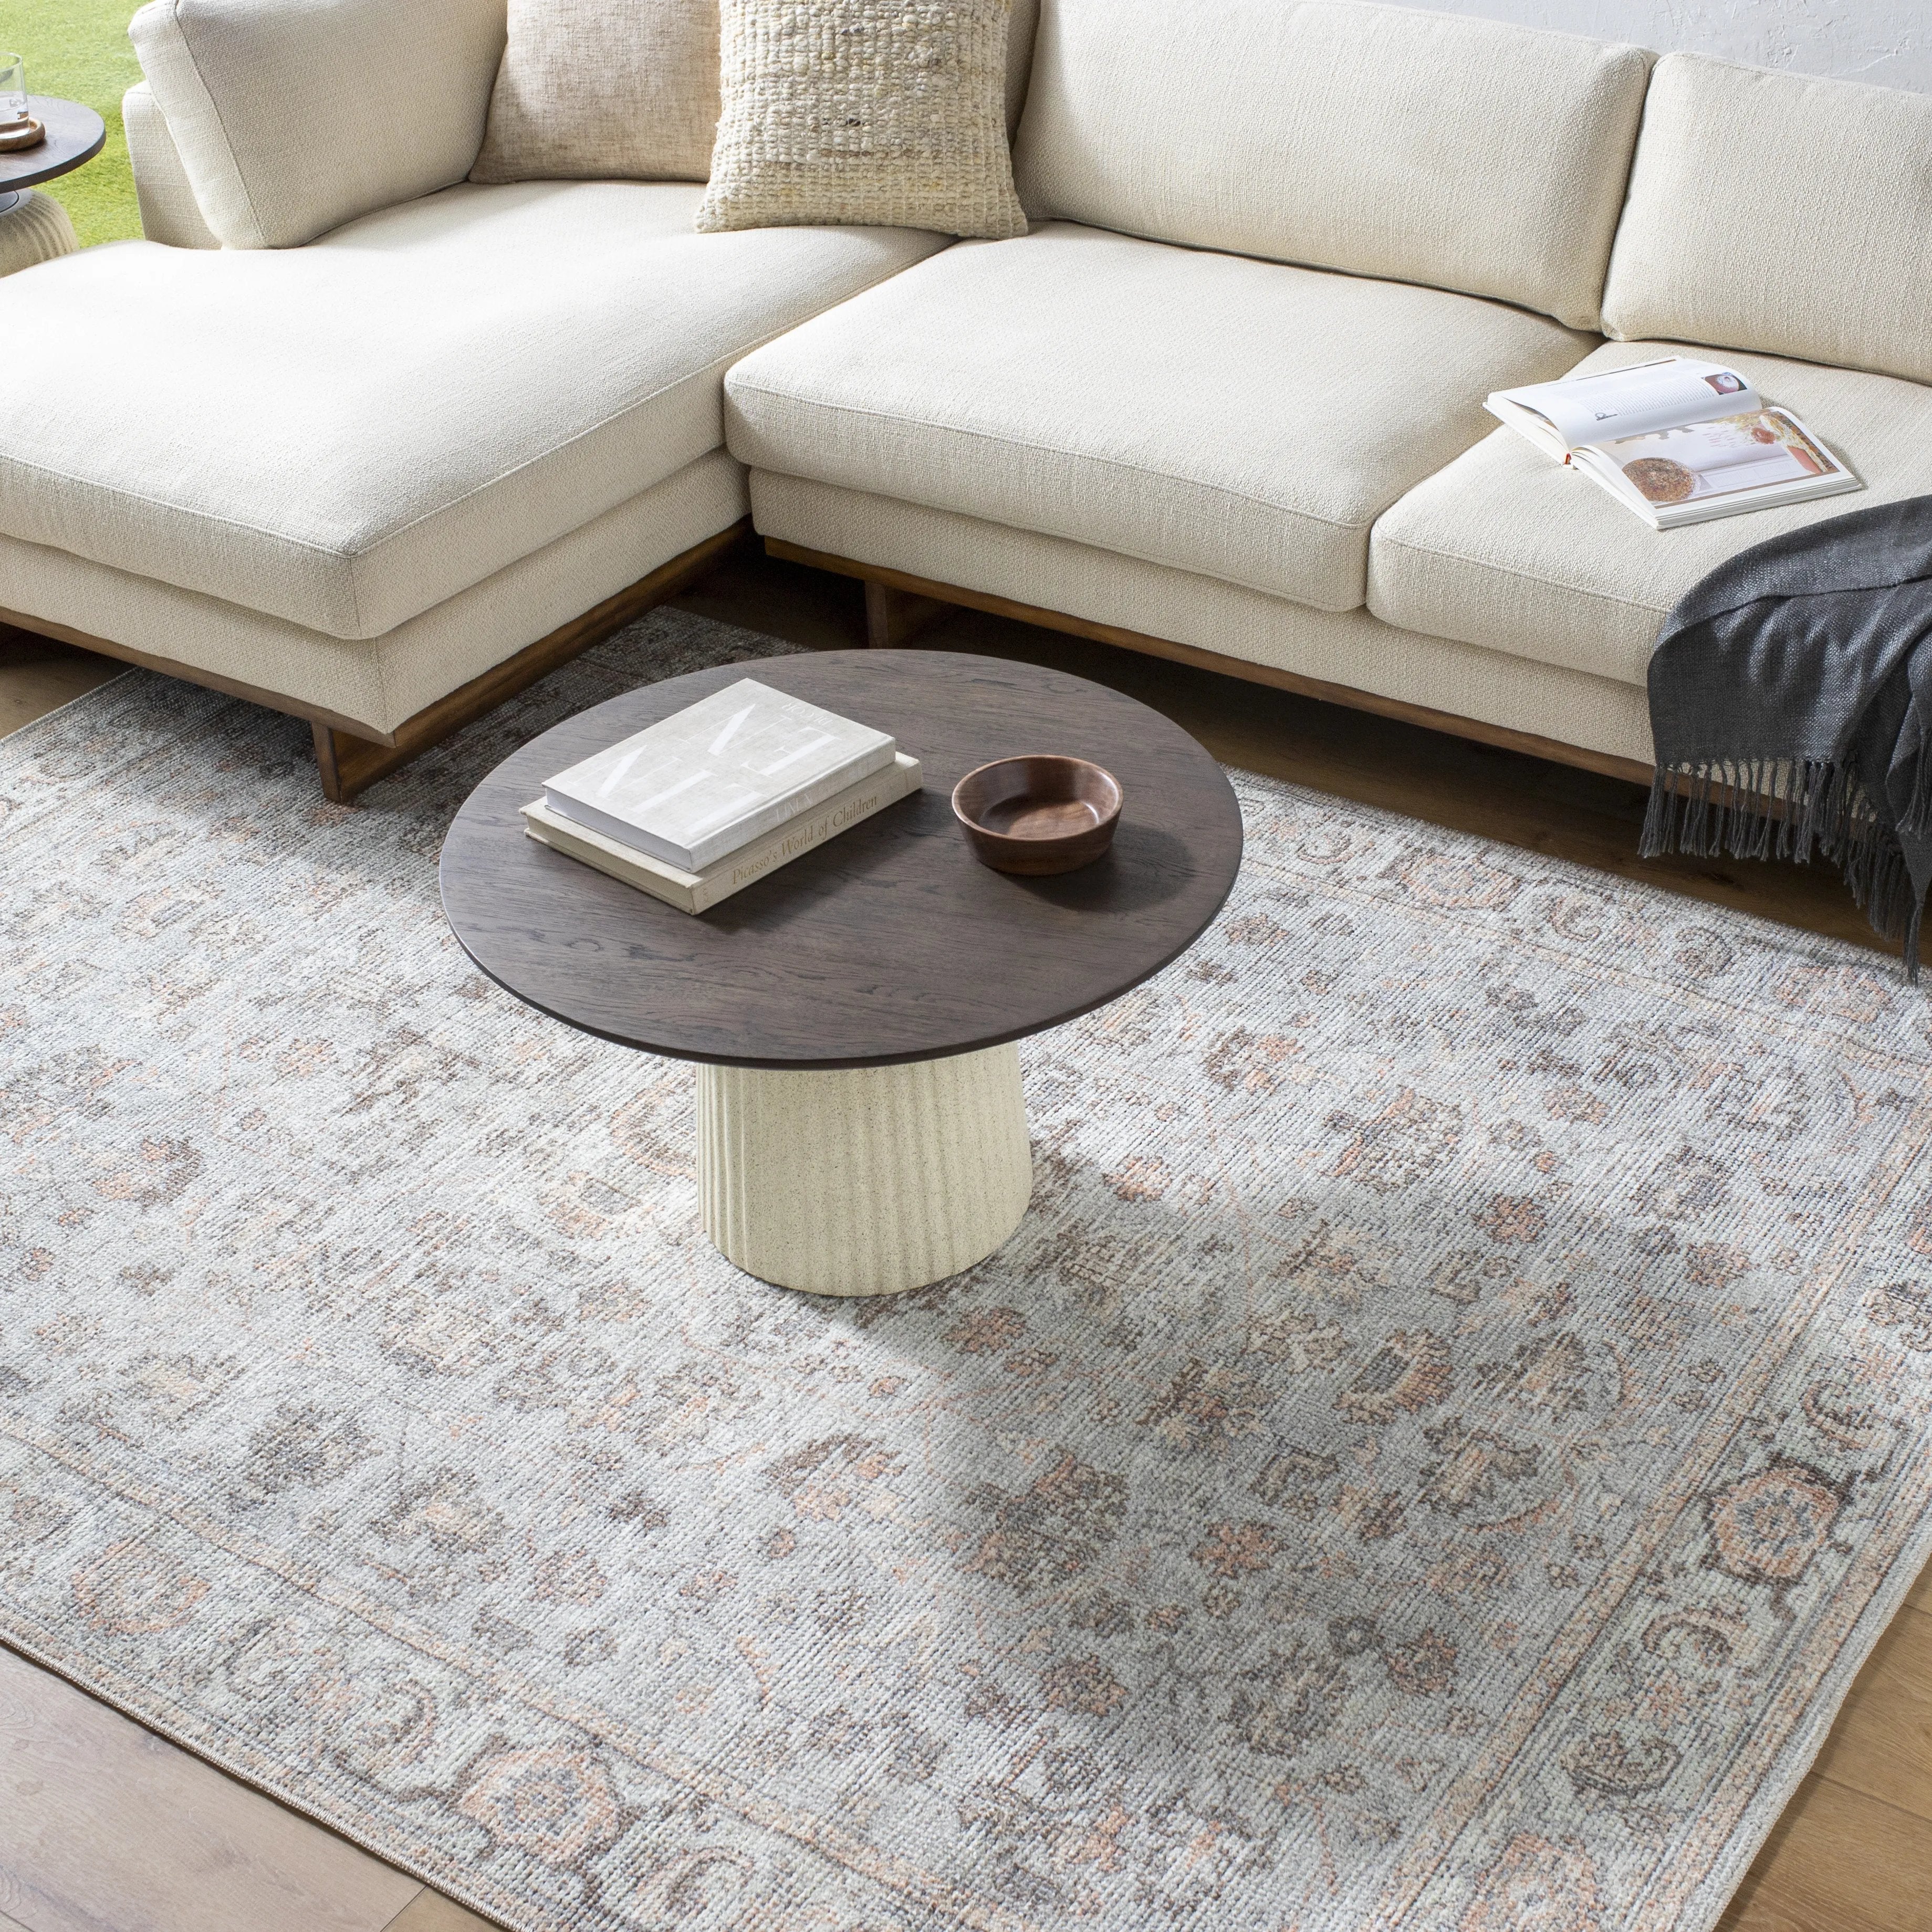 PNW Home x Surya available at Amethyst Home shipping to Australia, UK, and Canada. Organic modern design with easy to clean rugs for a family home in  the Dallas metro area.